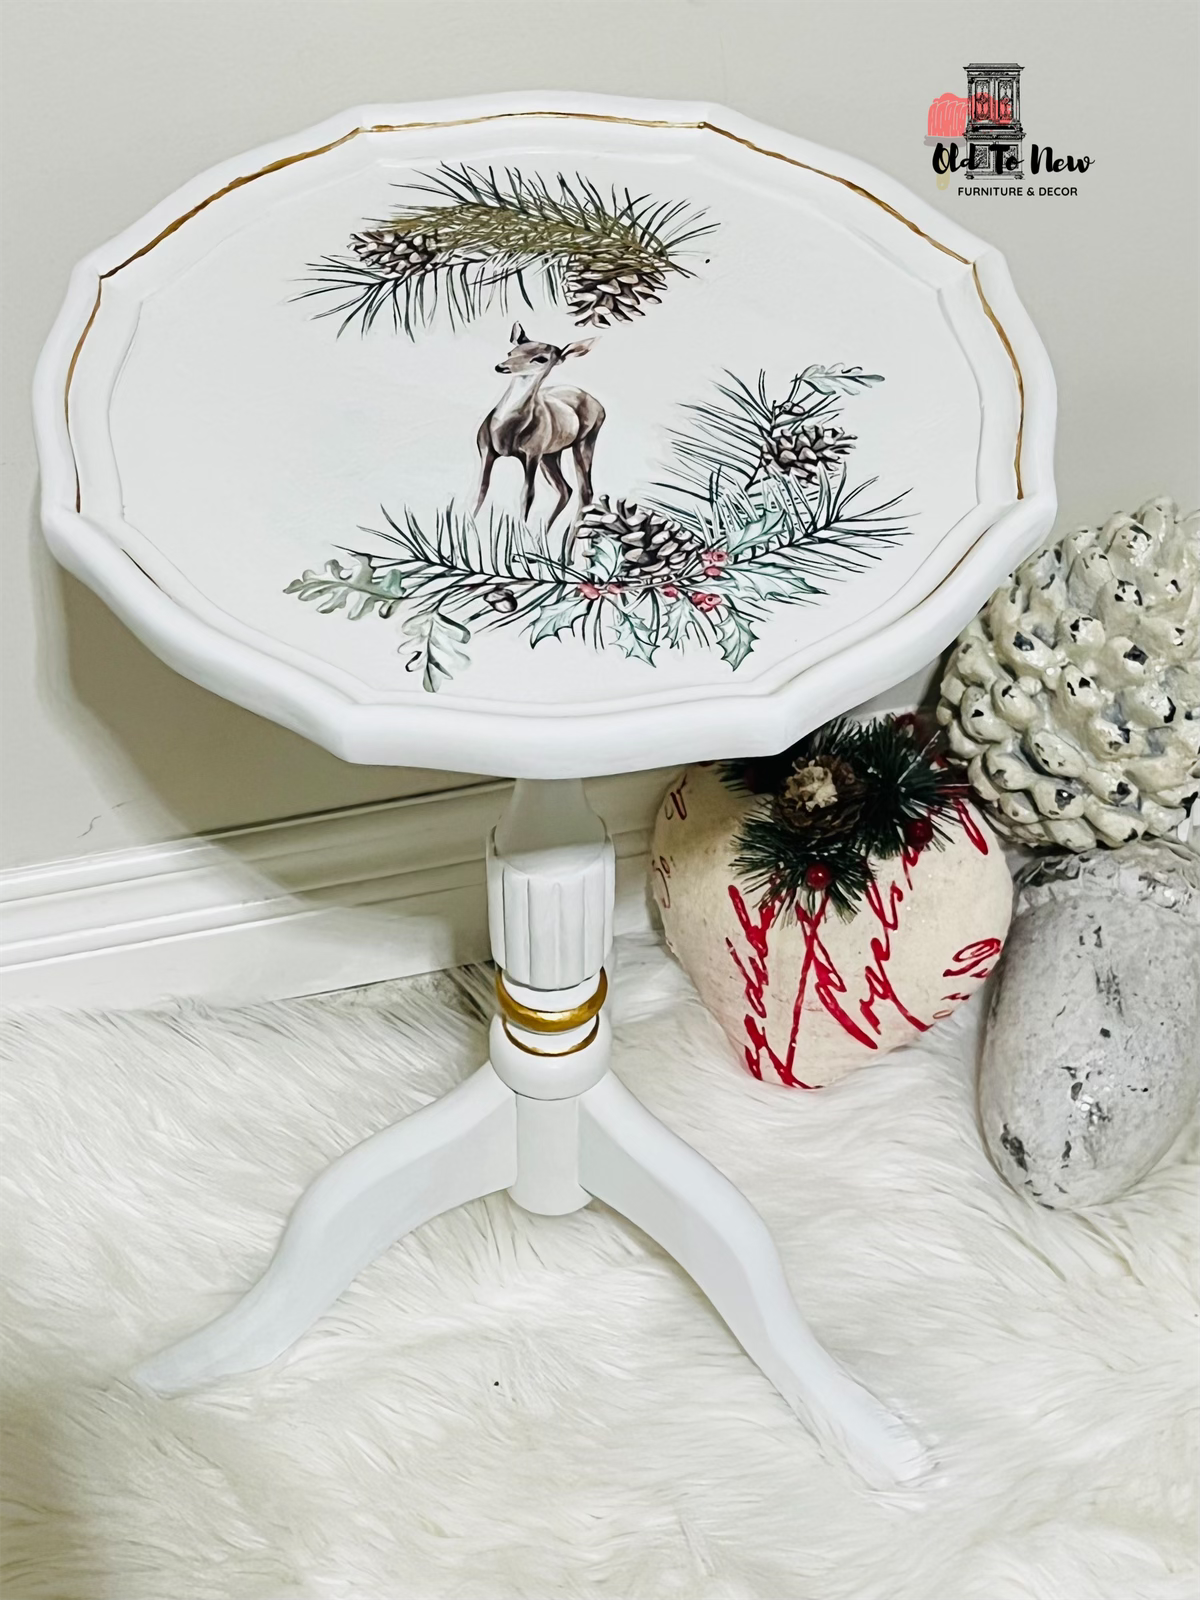 White and Gold Accent Table with Reindeer, Ever Green & Pine Cone "When Christmas Comes"  see it as Antique Furniture